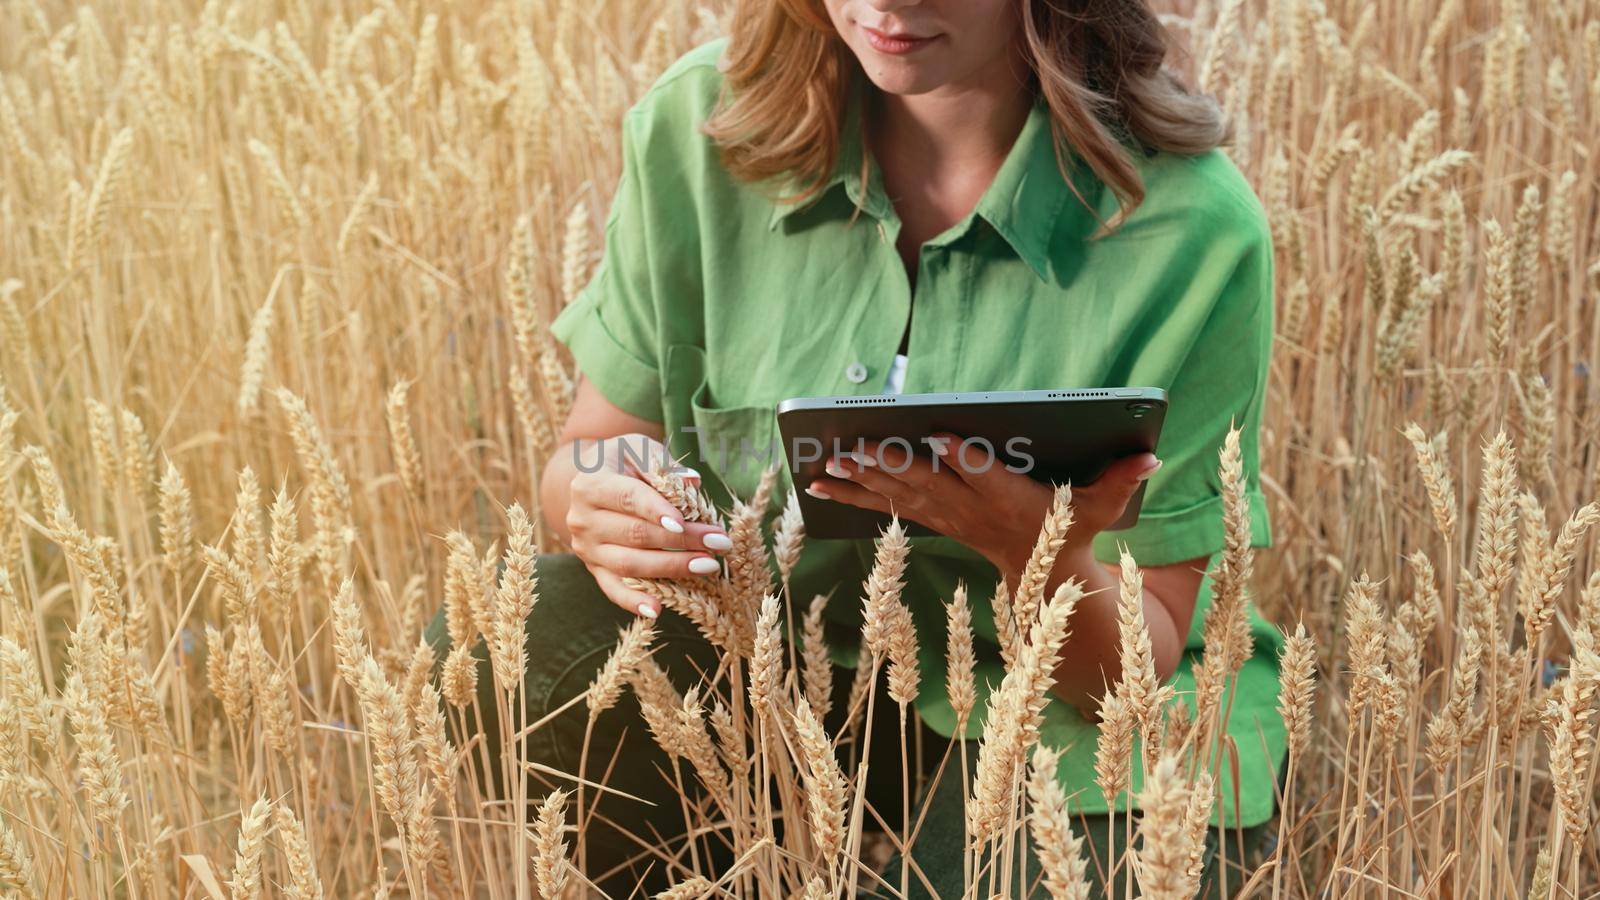 Woman agronomist works in ripe wheat field with digital tablet, checking integrity of ears, growth. Agricultural business, technology, smart eco system, harvest concept. High quality photo